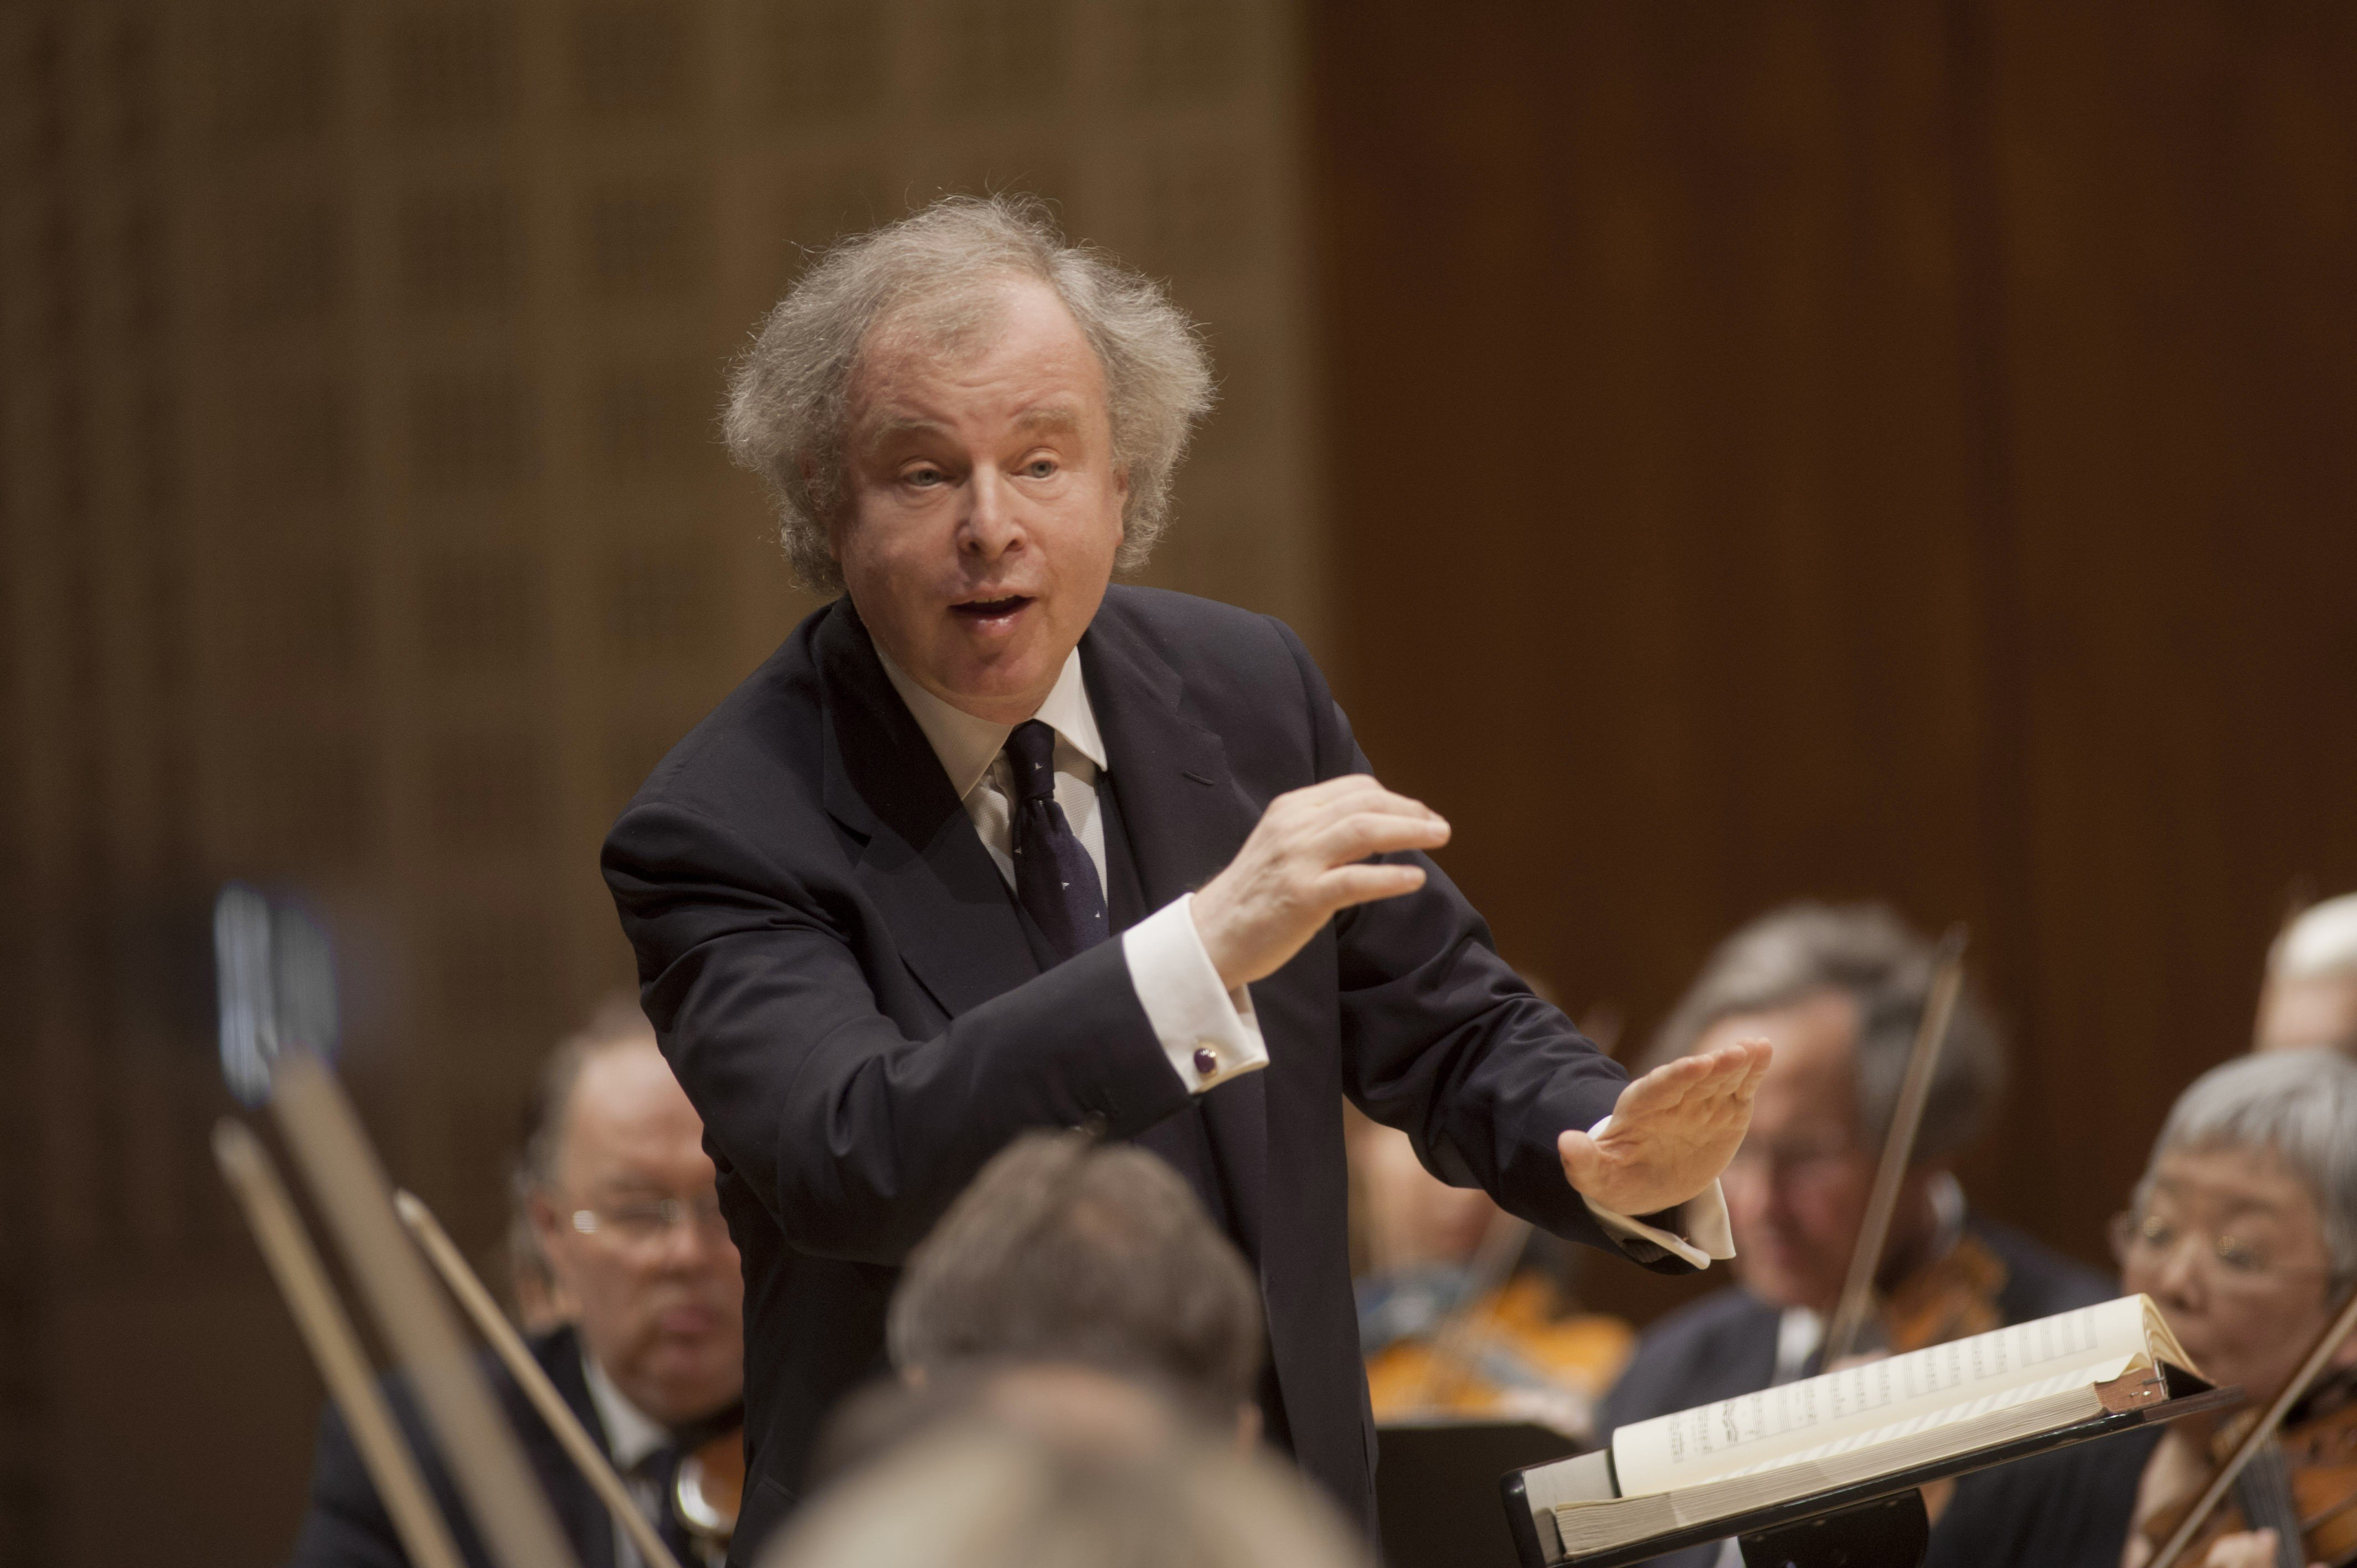 Award-winning pianist and conductor András Schiff is due to perform in Hong Kong in November. Photo: Priska Ketterer